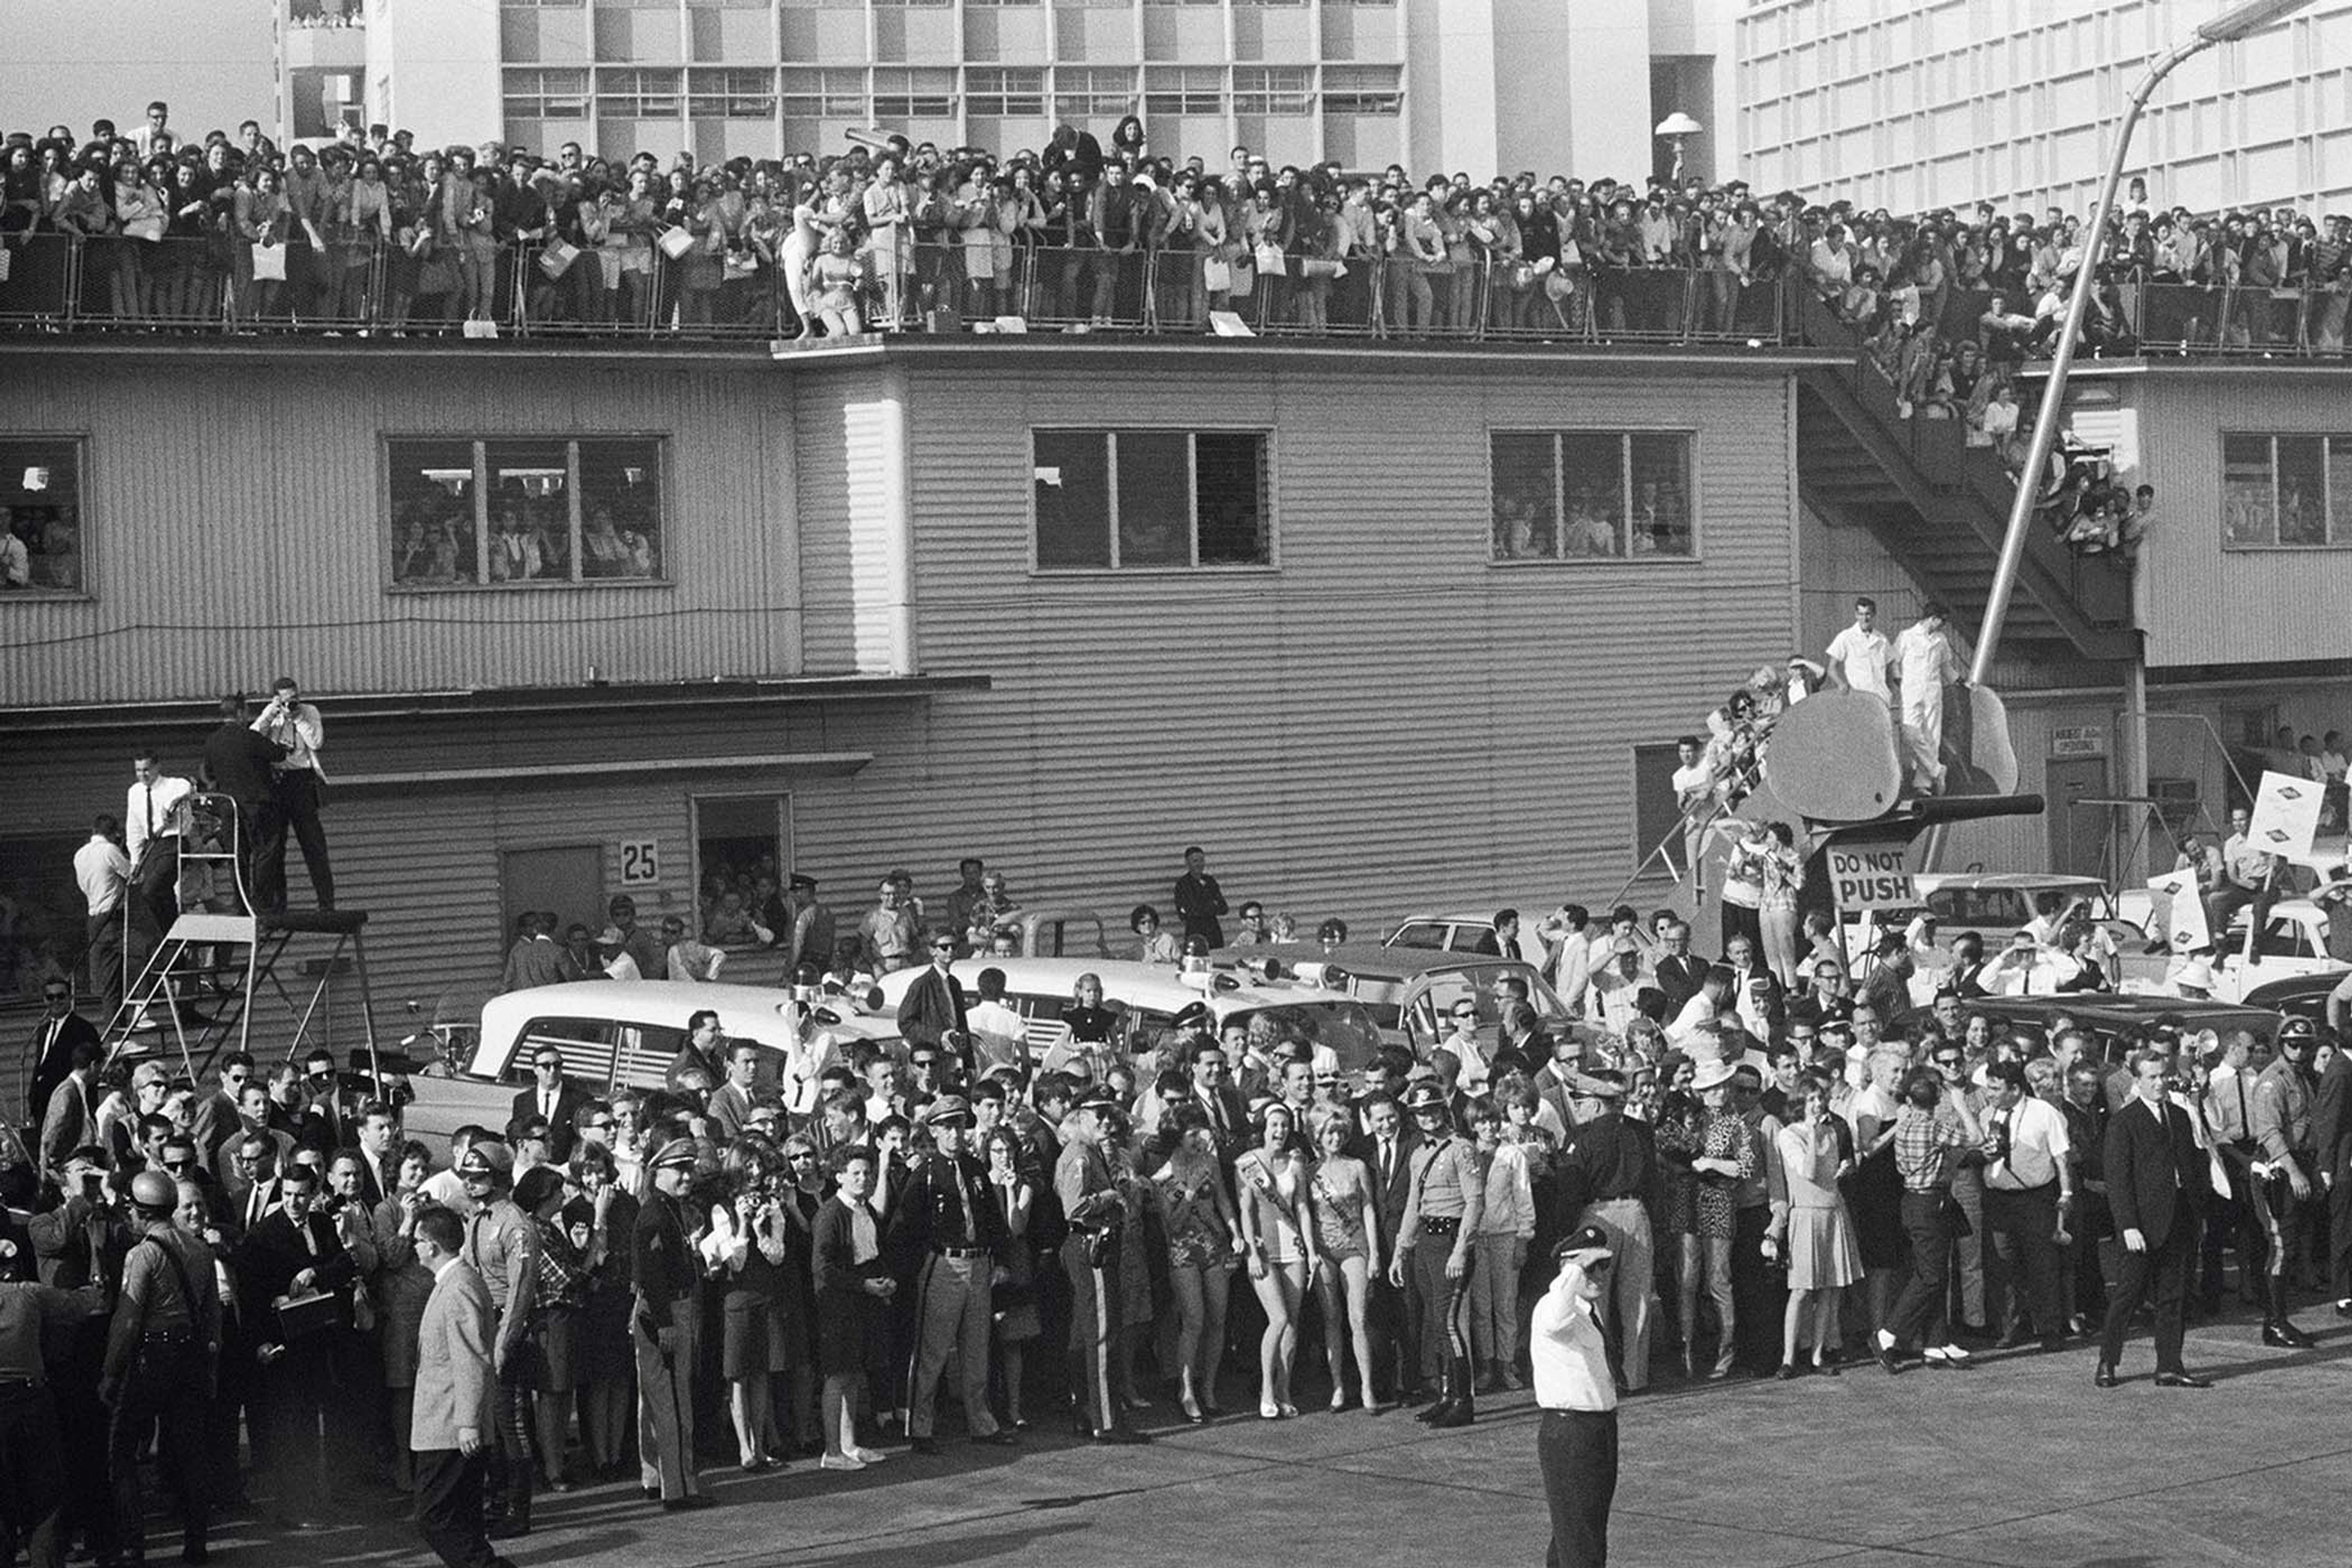 Black and white photograph taken by Paul McCartney showing a large crowd of people awaiting the arrival of The Beatles at Miami in 1964